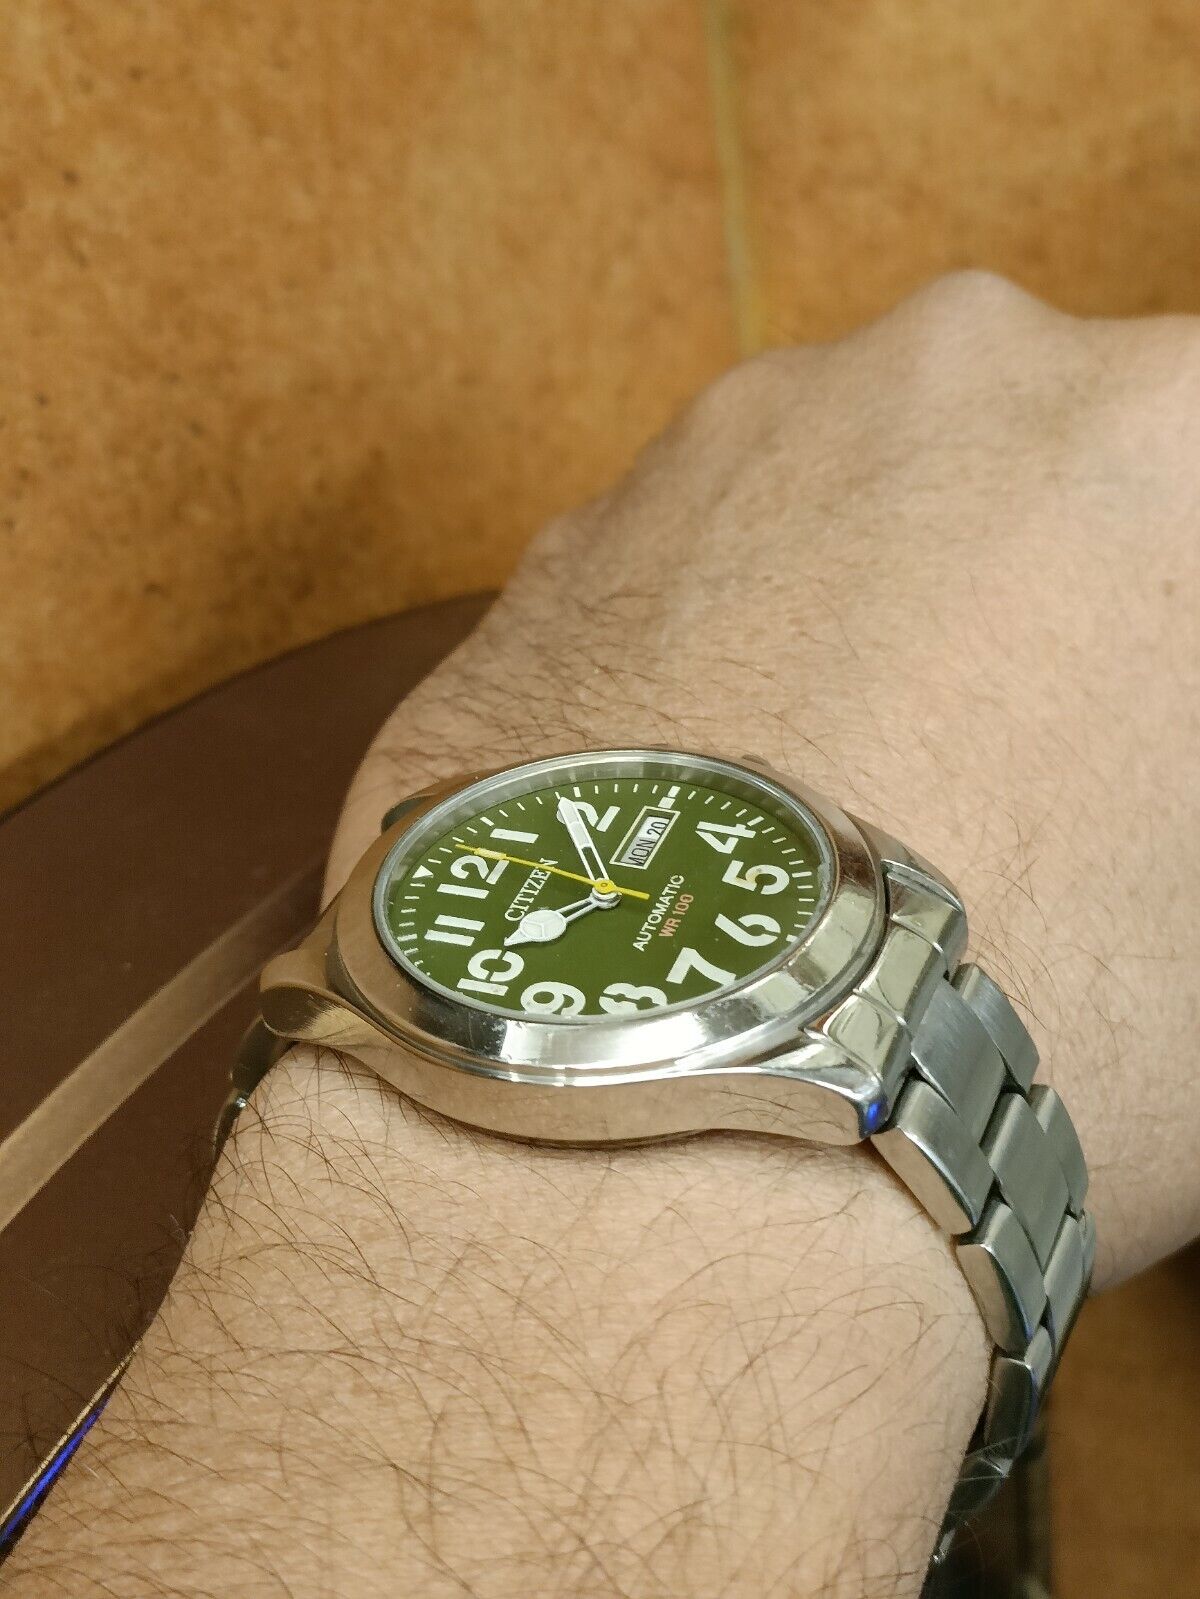 Citizen Automatic WR 100 Green Dial Day Date Men's Japan Vintage Watch